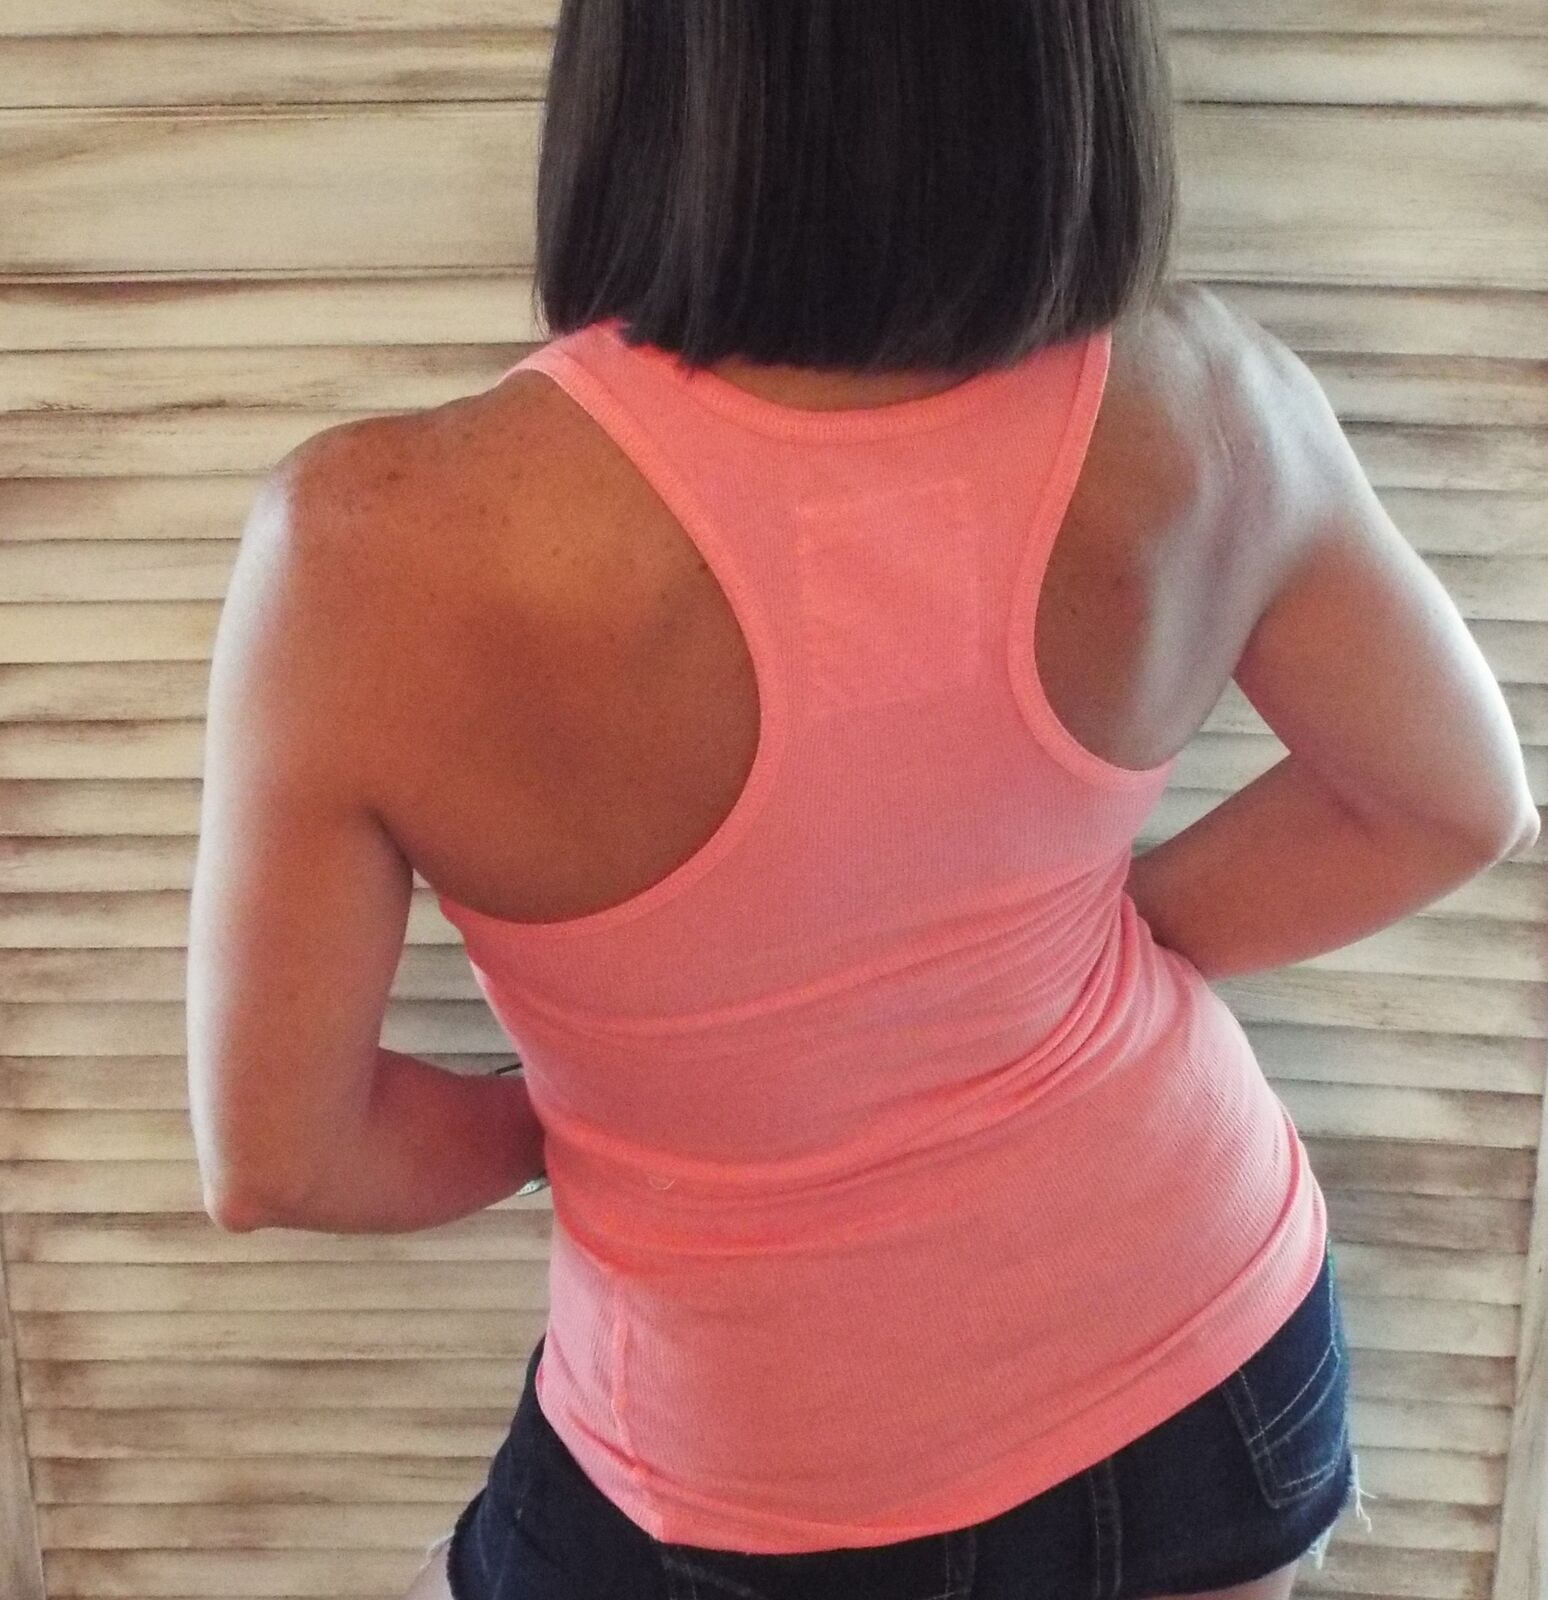 "Can't Touch This" Ribbed Racerback Low Scoop Boy Beater Cleavage Summer Tank Top Coral PLUS